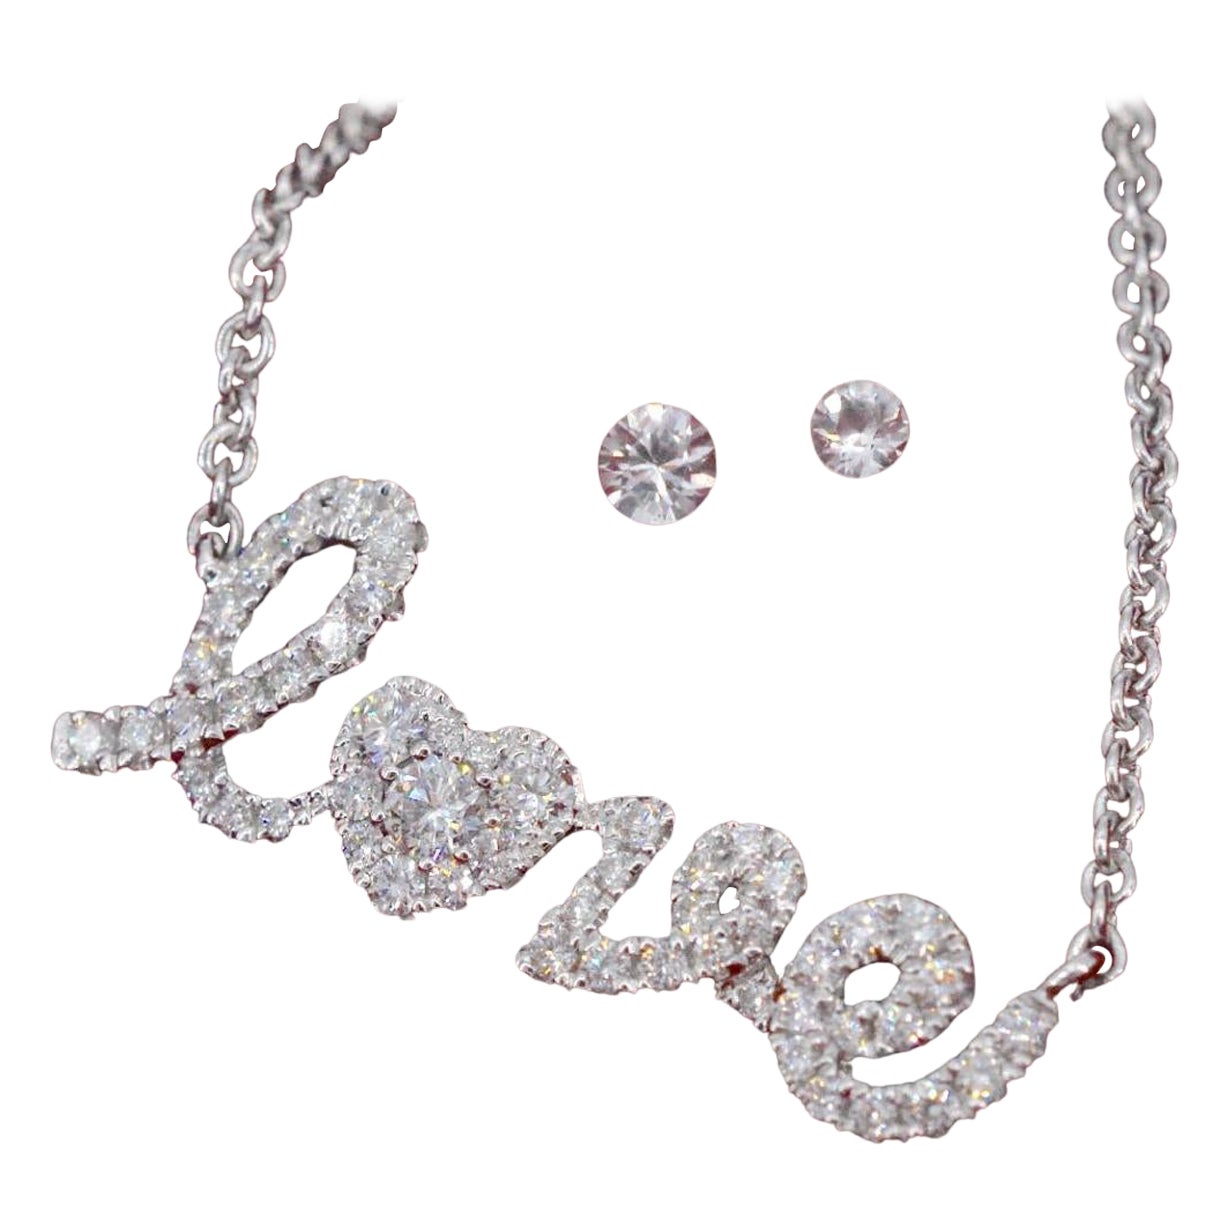 White Gold 'Love' Necklace with Diamonds